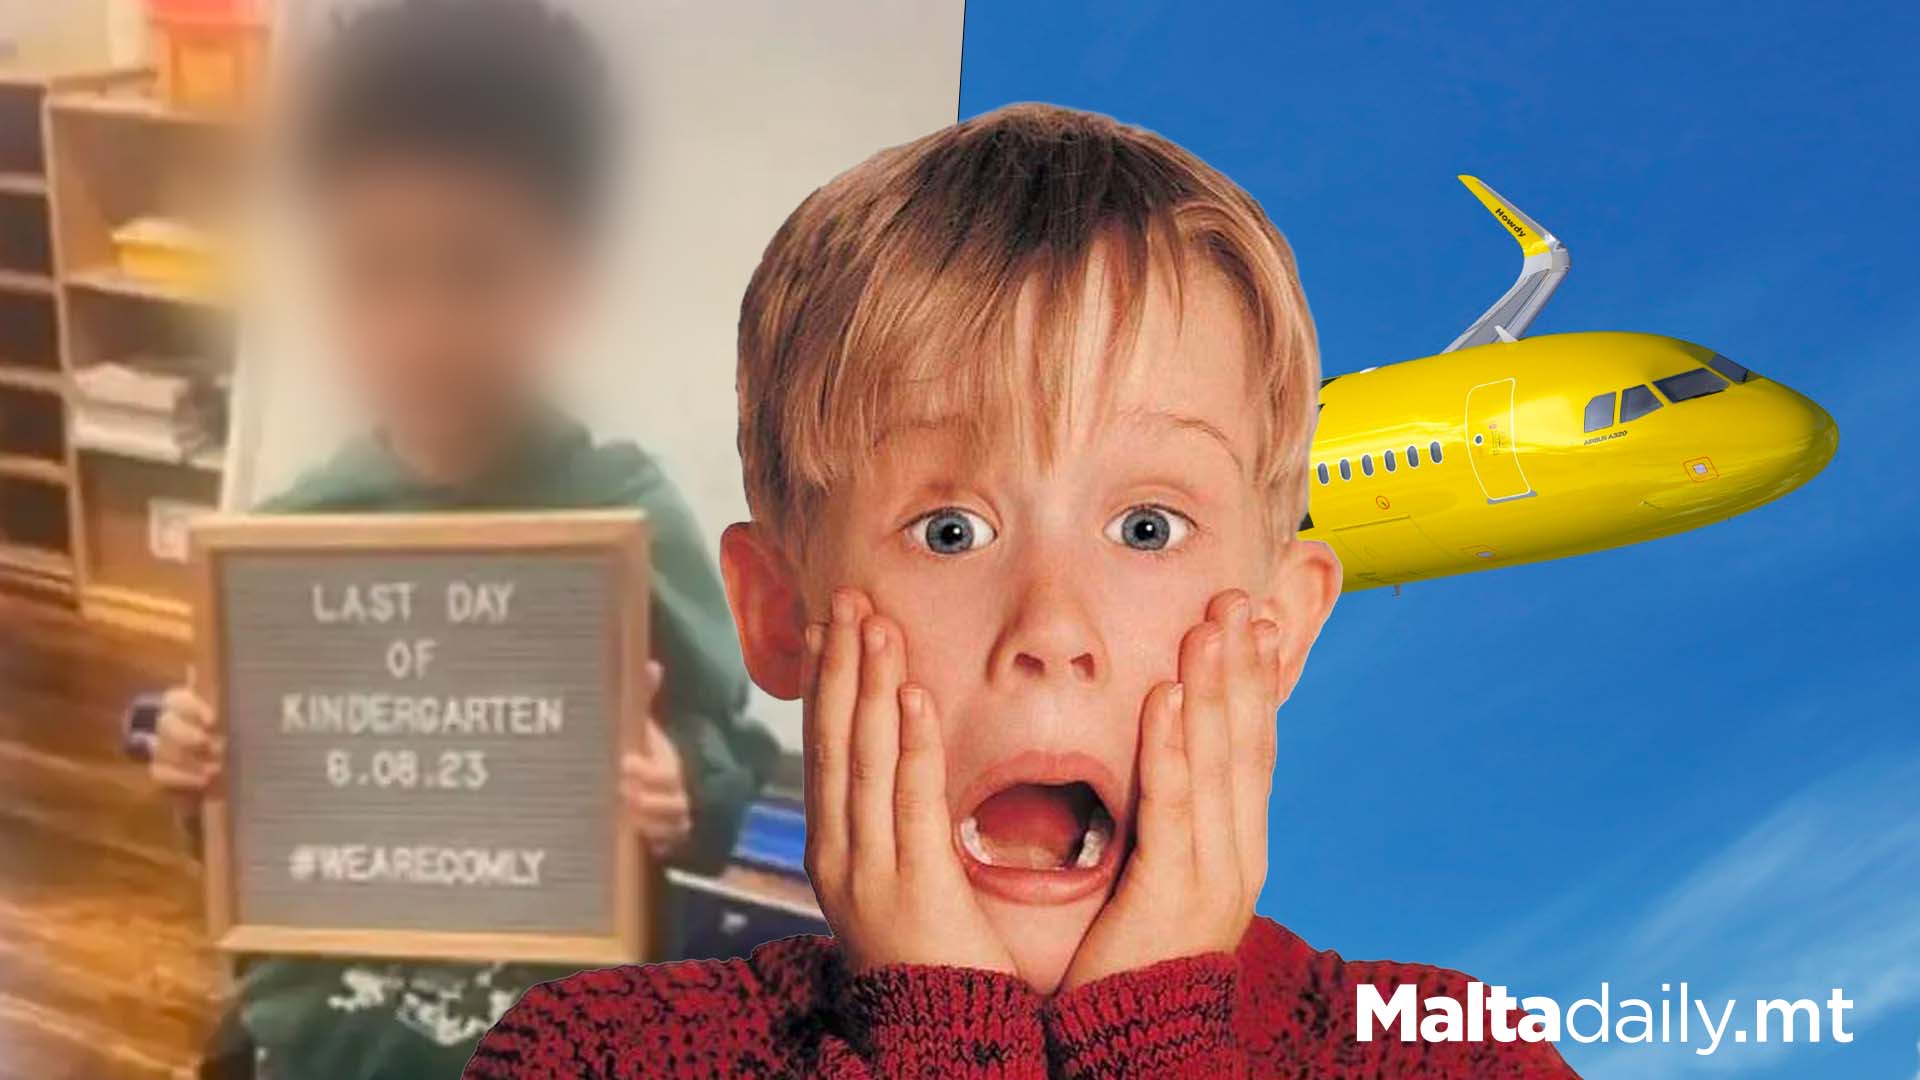 Real Life Home Alone? 6 Year Old Put On Wrong Flight